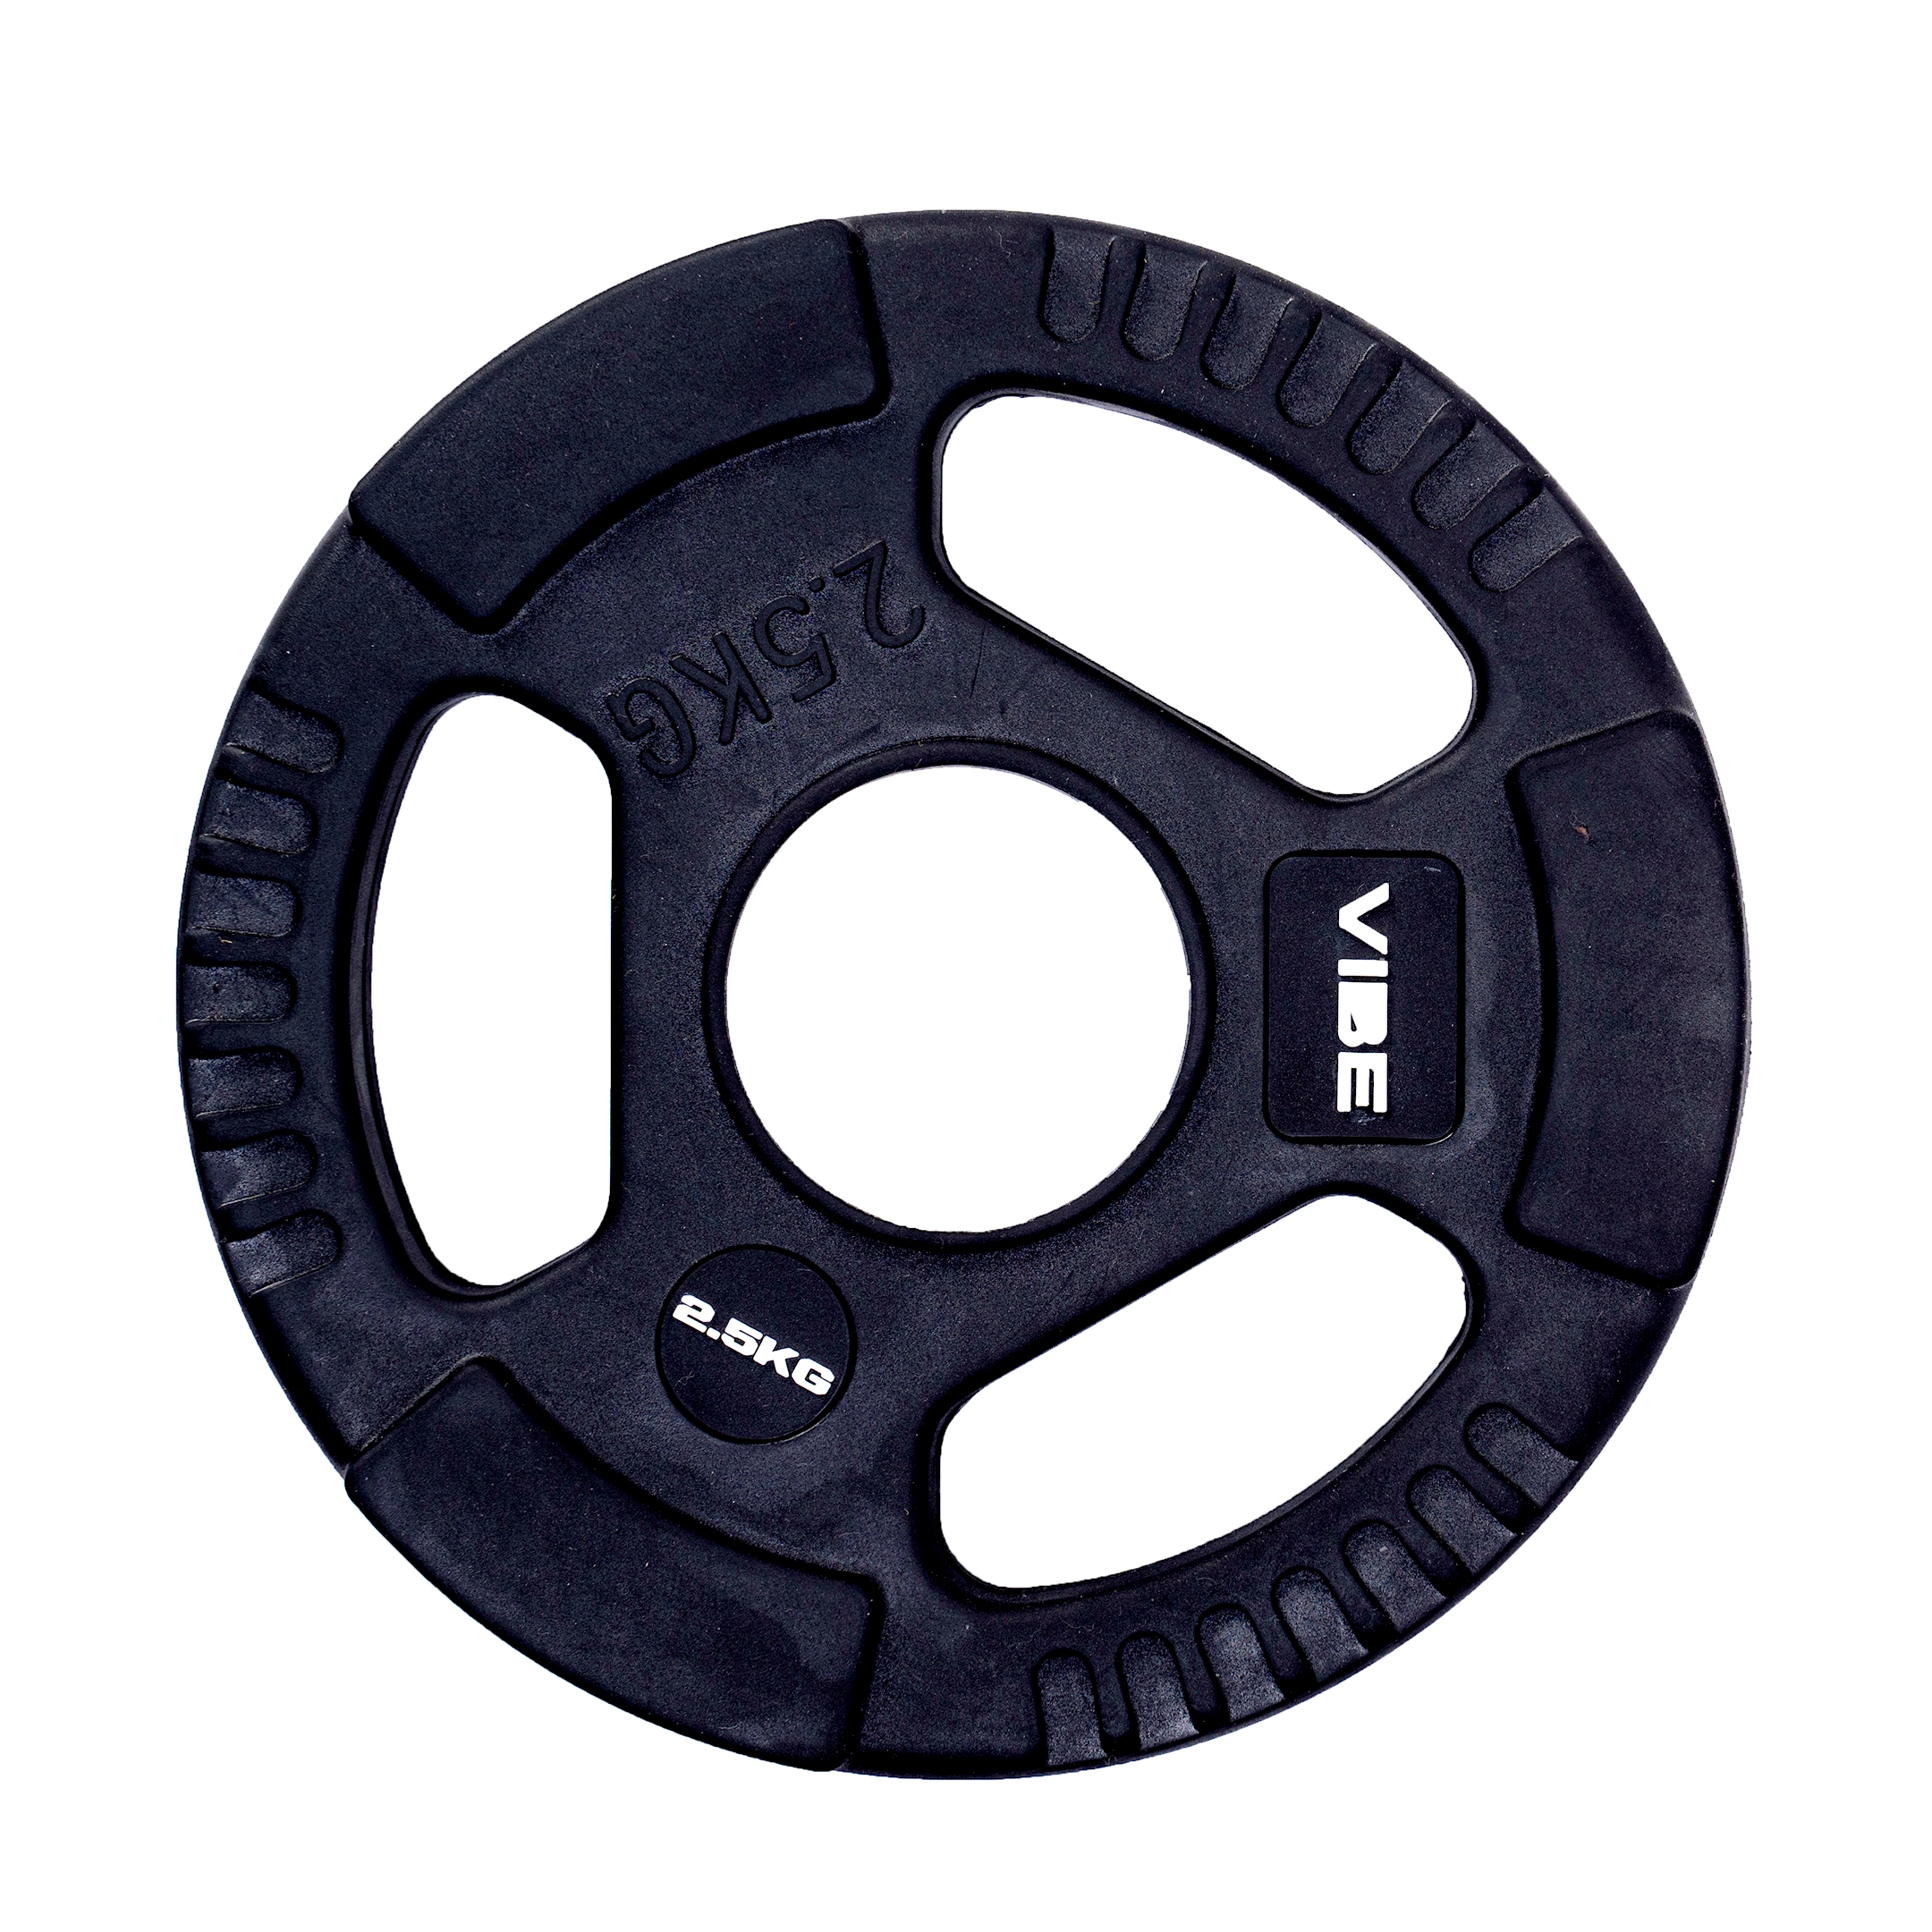 Rubber Coated Weight Plate – 2.5 Kg (Pair)